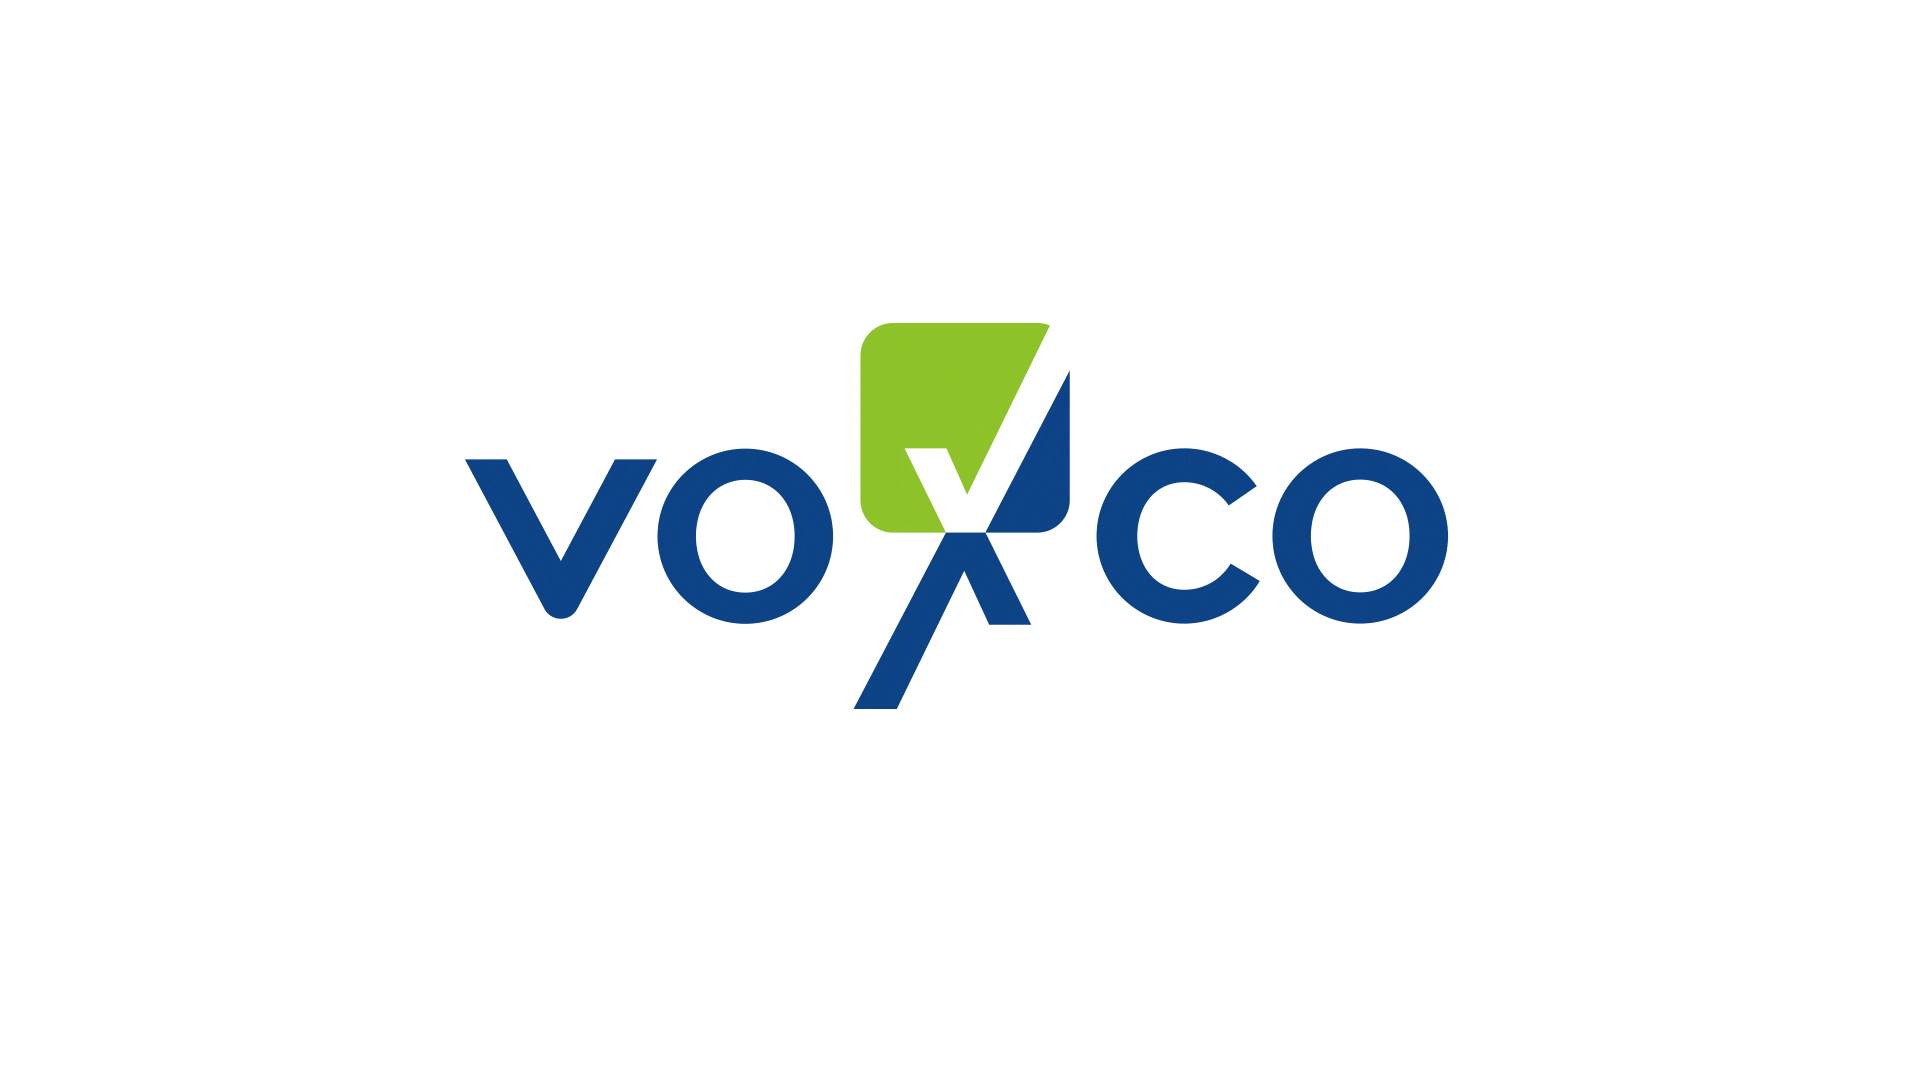 Voxco Old and new